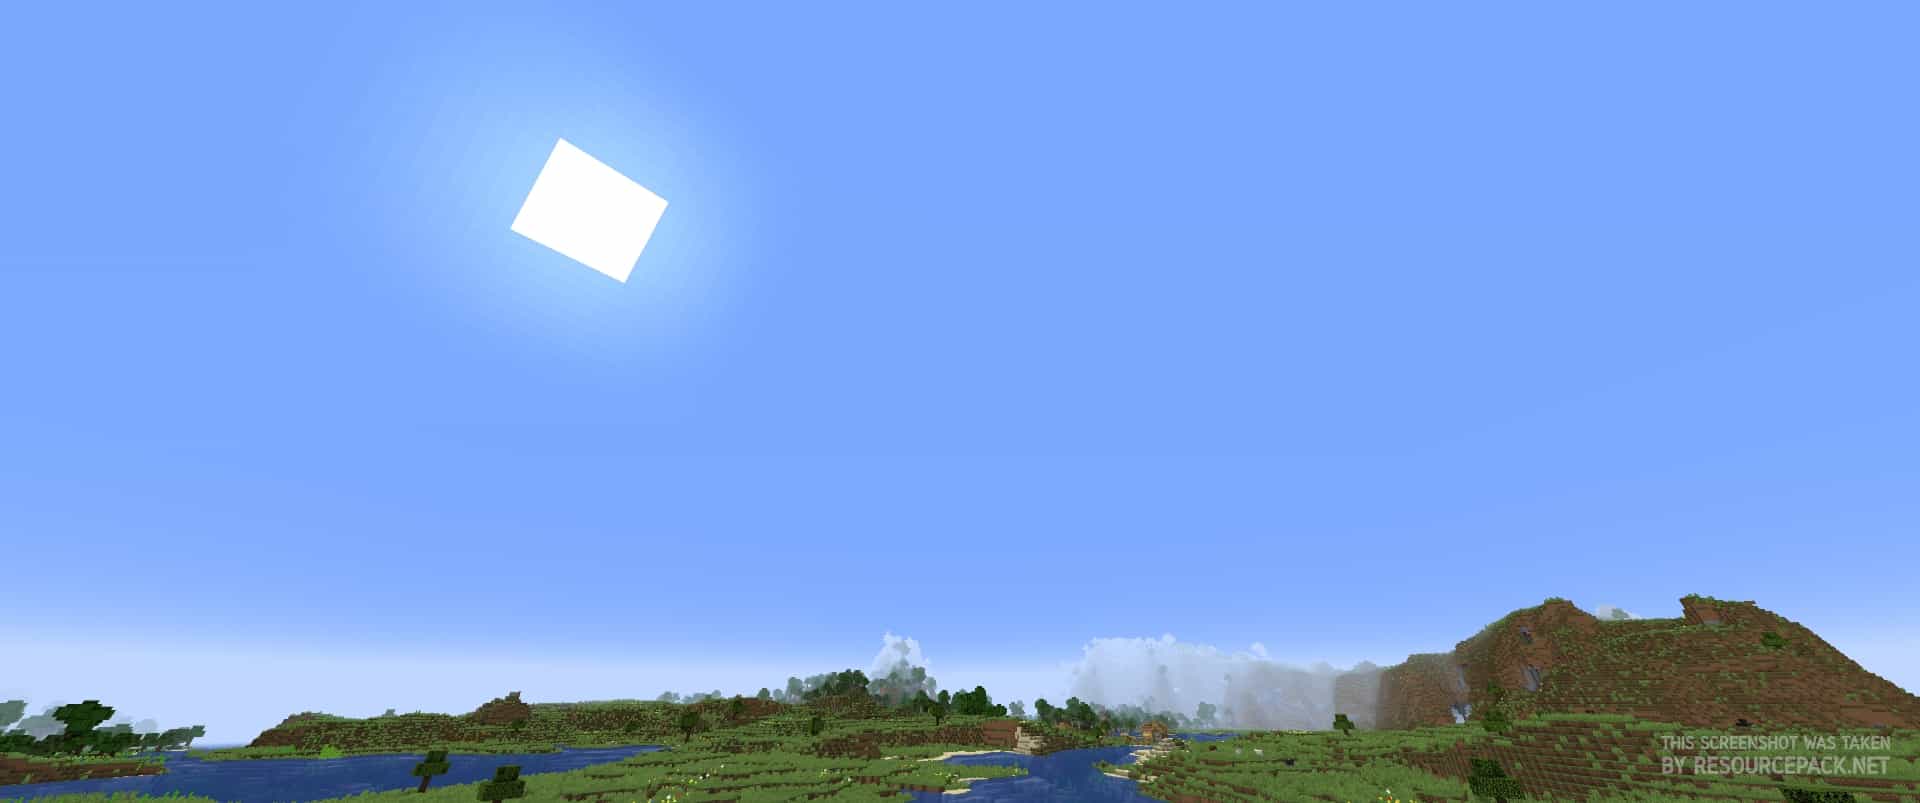 Dramatic Skys Resource Pack  /  | Texture Packs